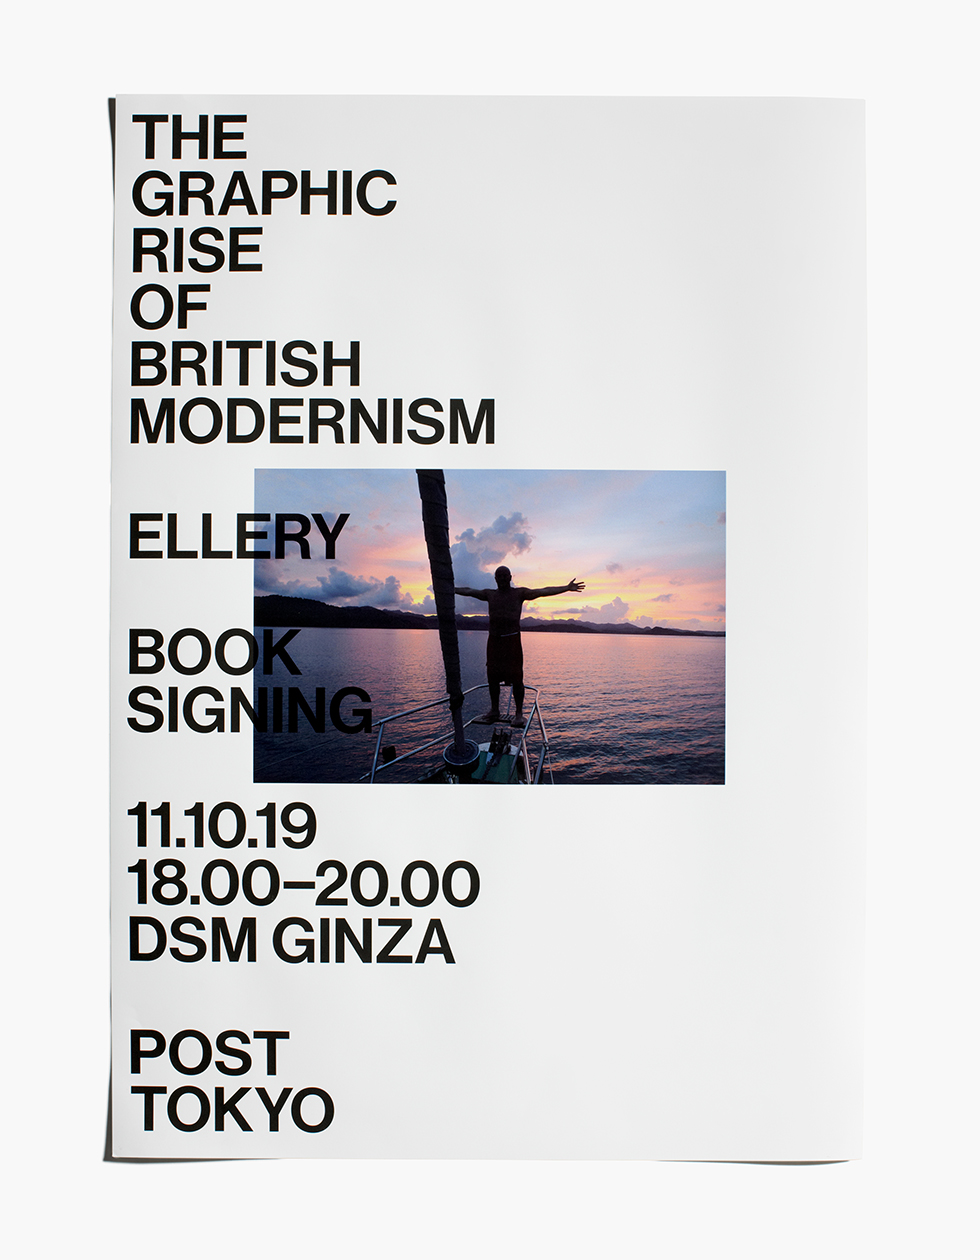 Jonathan Ellery, The Graphic Rise of British Modernism, Book Signing, Post, Tokyo, Dover Street Market Ginza, BookJonathan Ellery, The Graphic Rise of British Modernism,2019